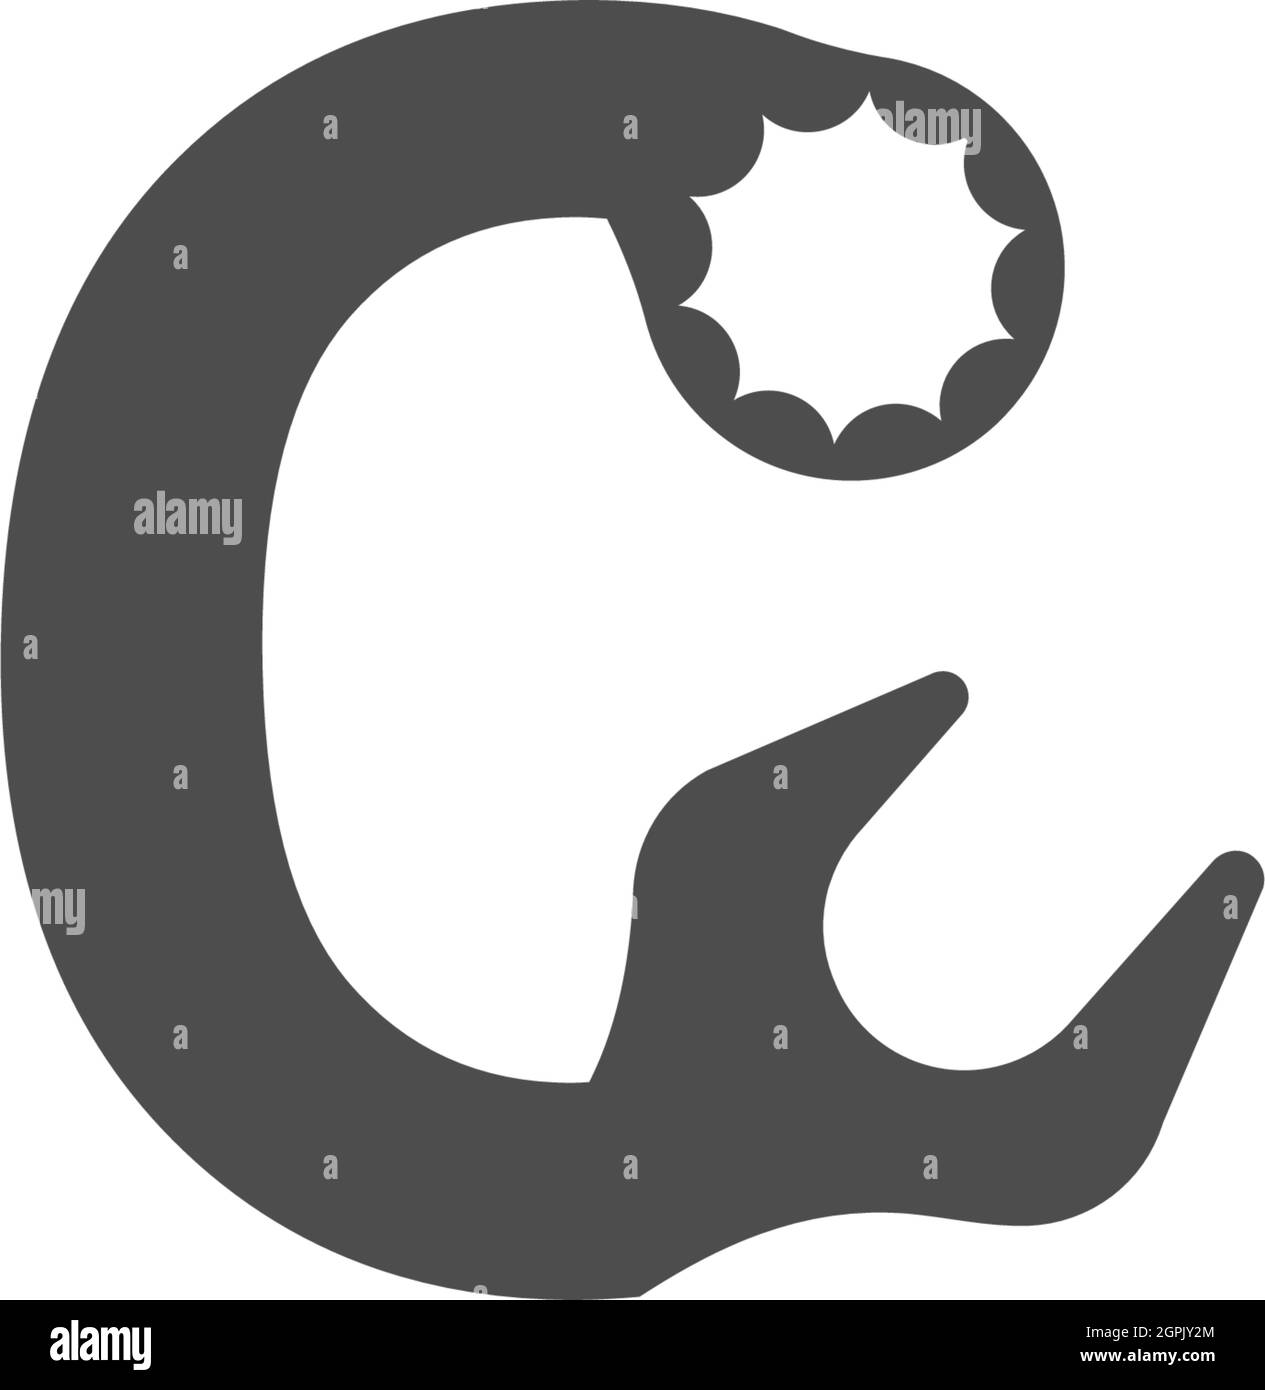 Letter C logo icon with wrench design vector Stock Vector